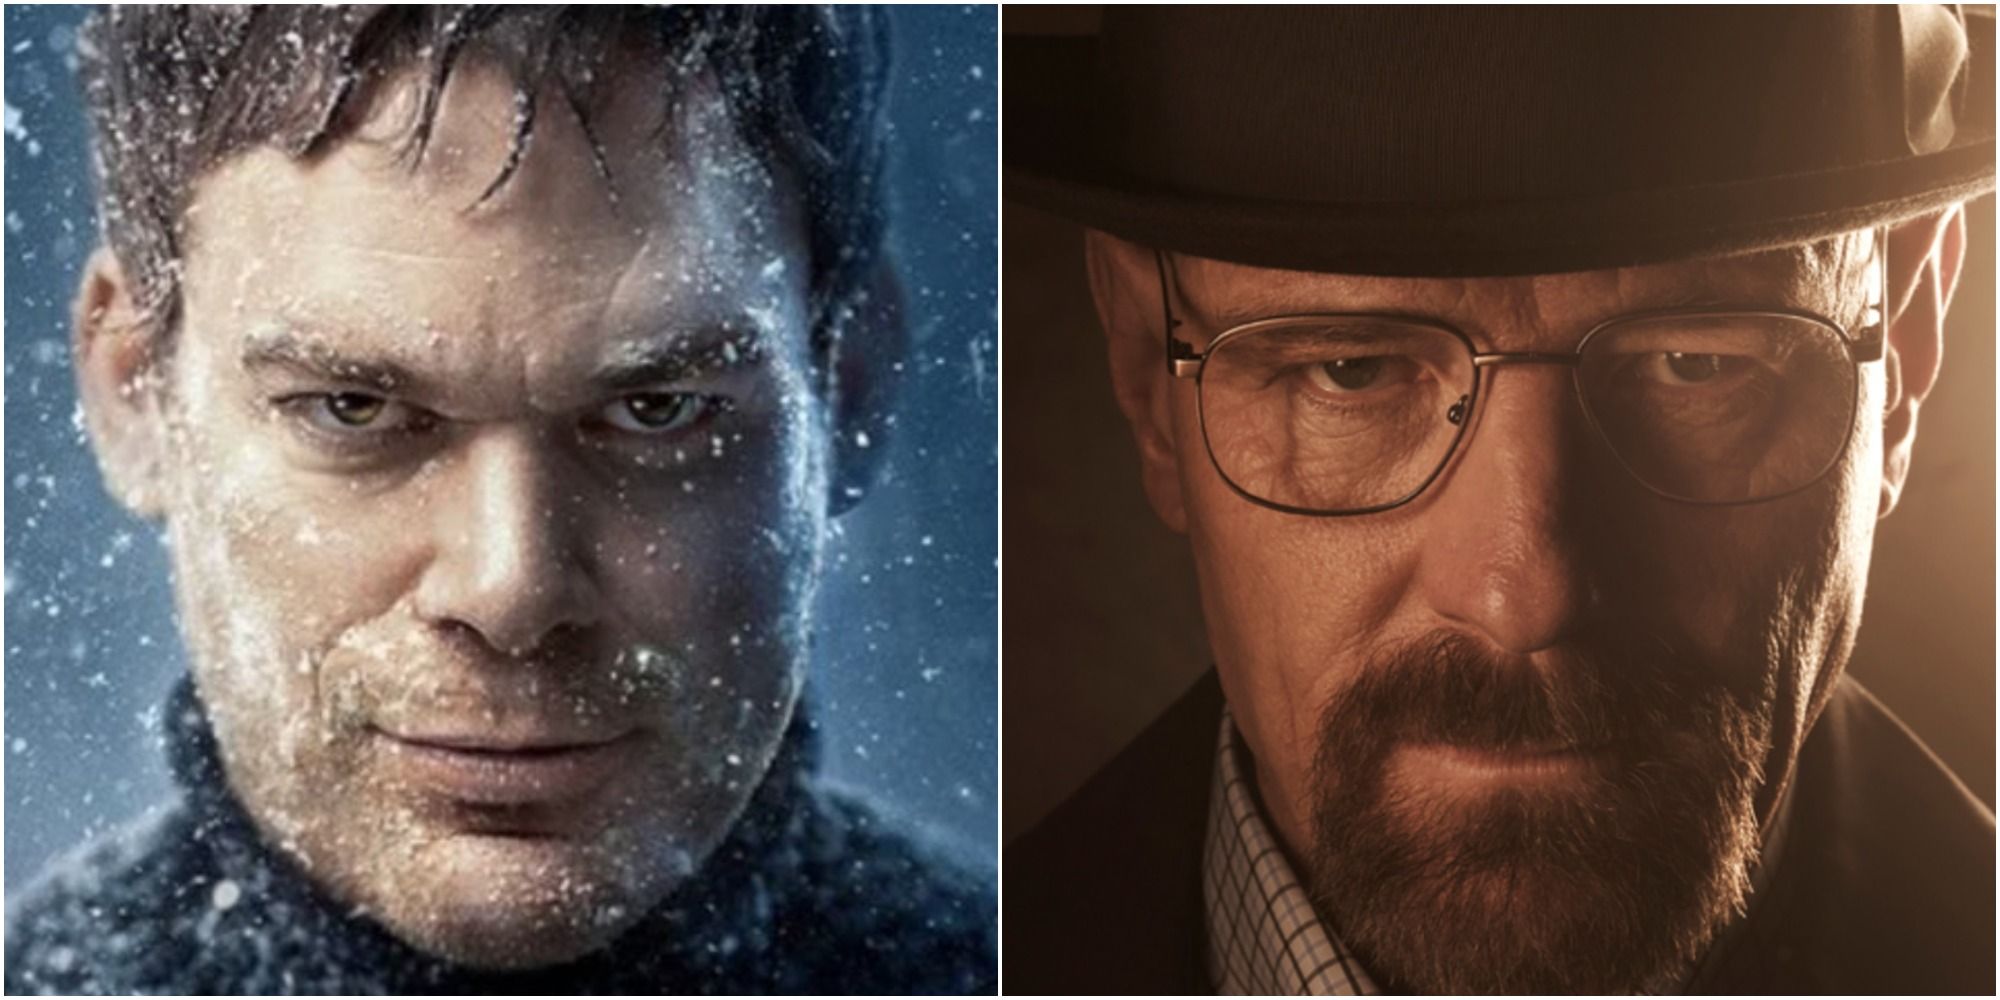 New Blood Finally Gave Dexter The Walter White Finale He Deserved 10 Years Ago